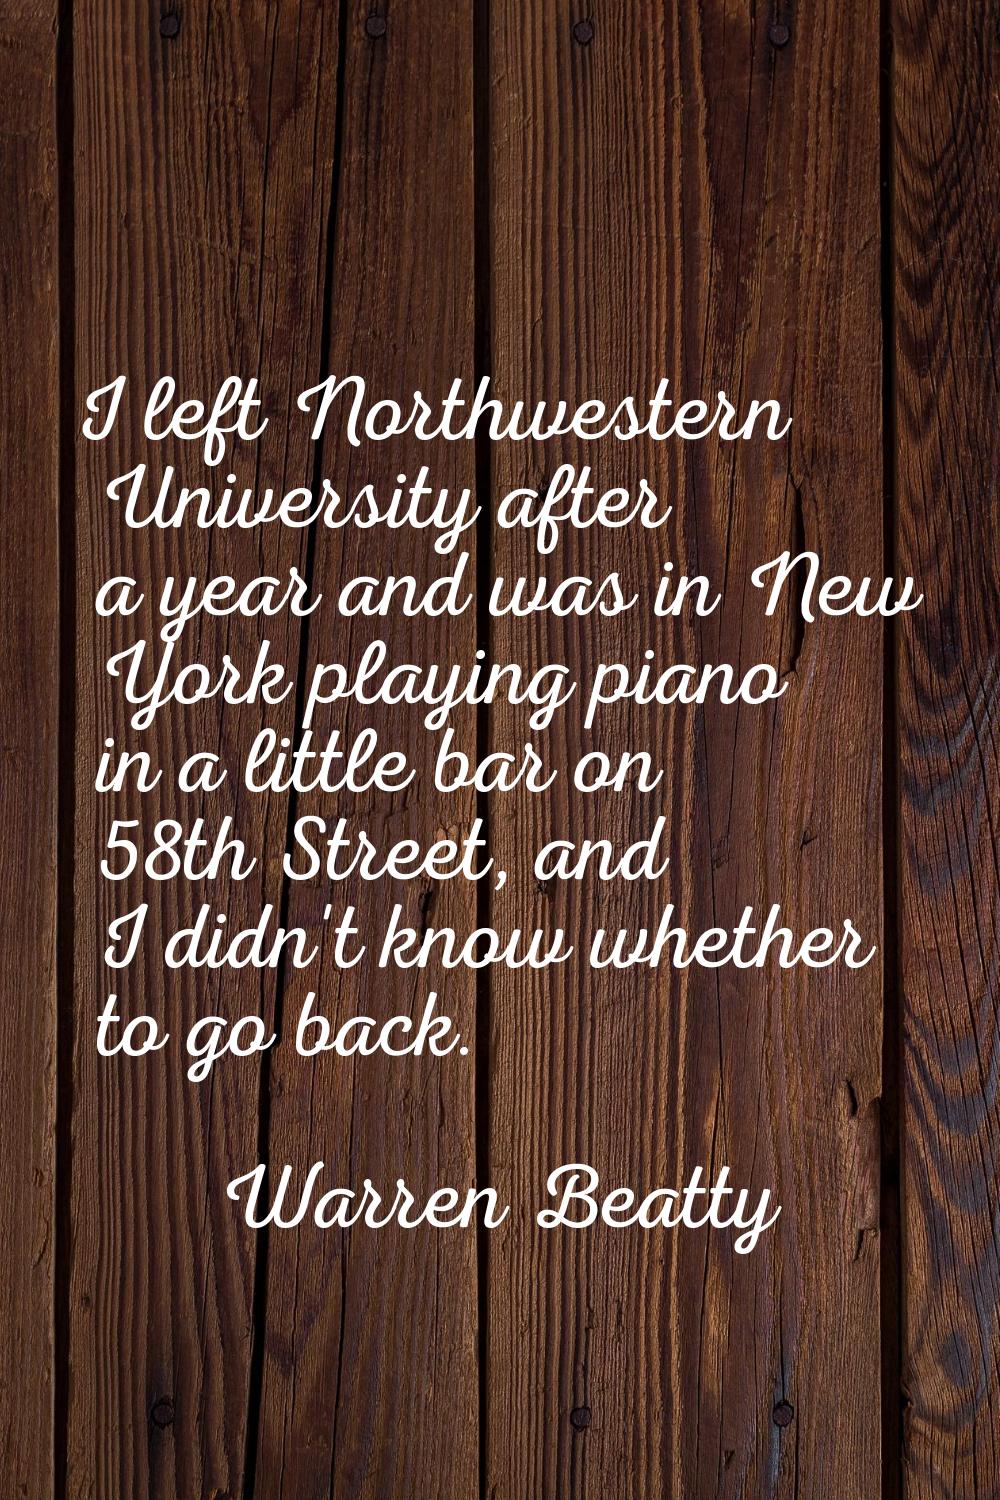 I left Northwestern University after a year and was in New York playing piano in a little bar on 58